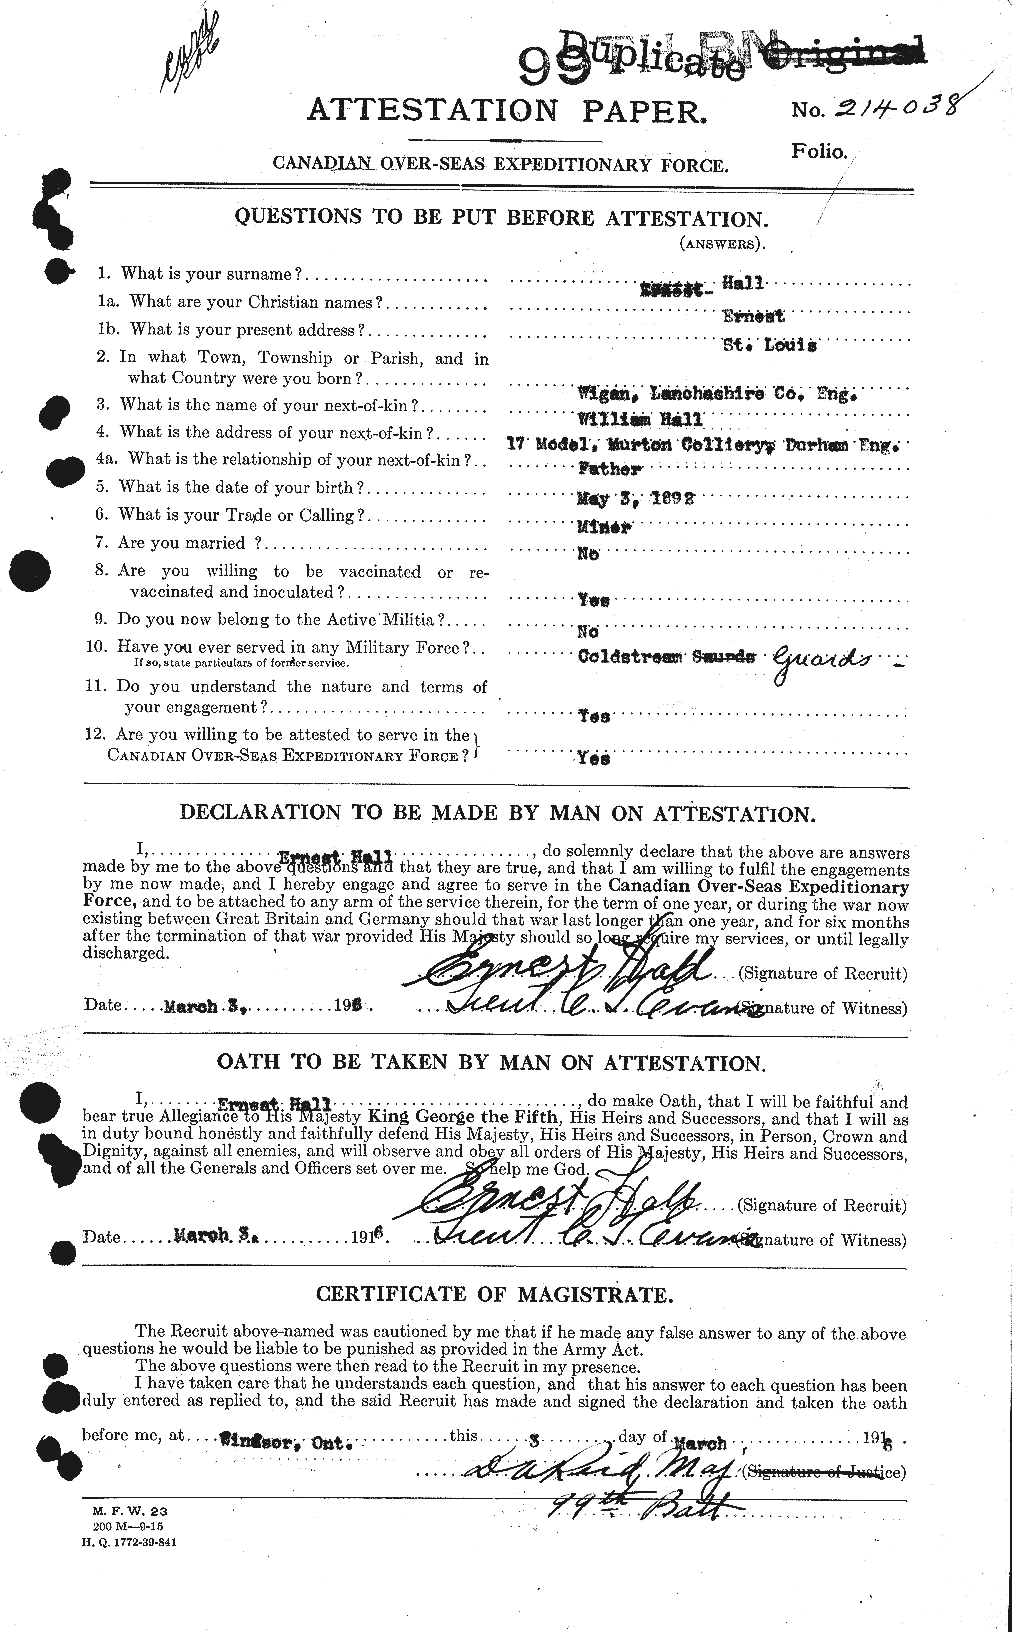 Personnel Records of the First World War - CEF 372741a